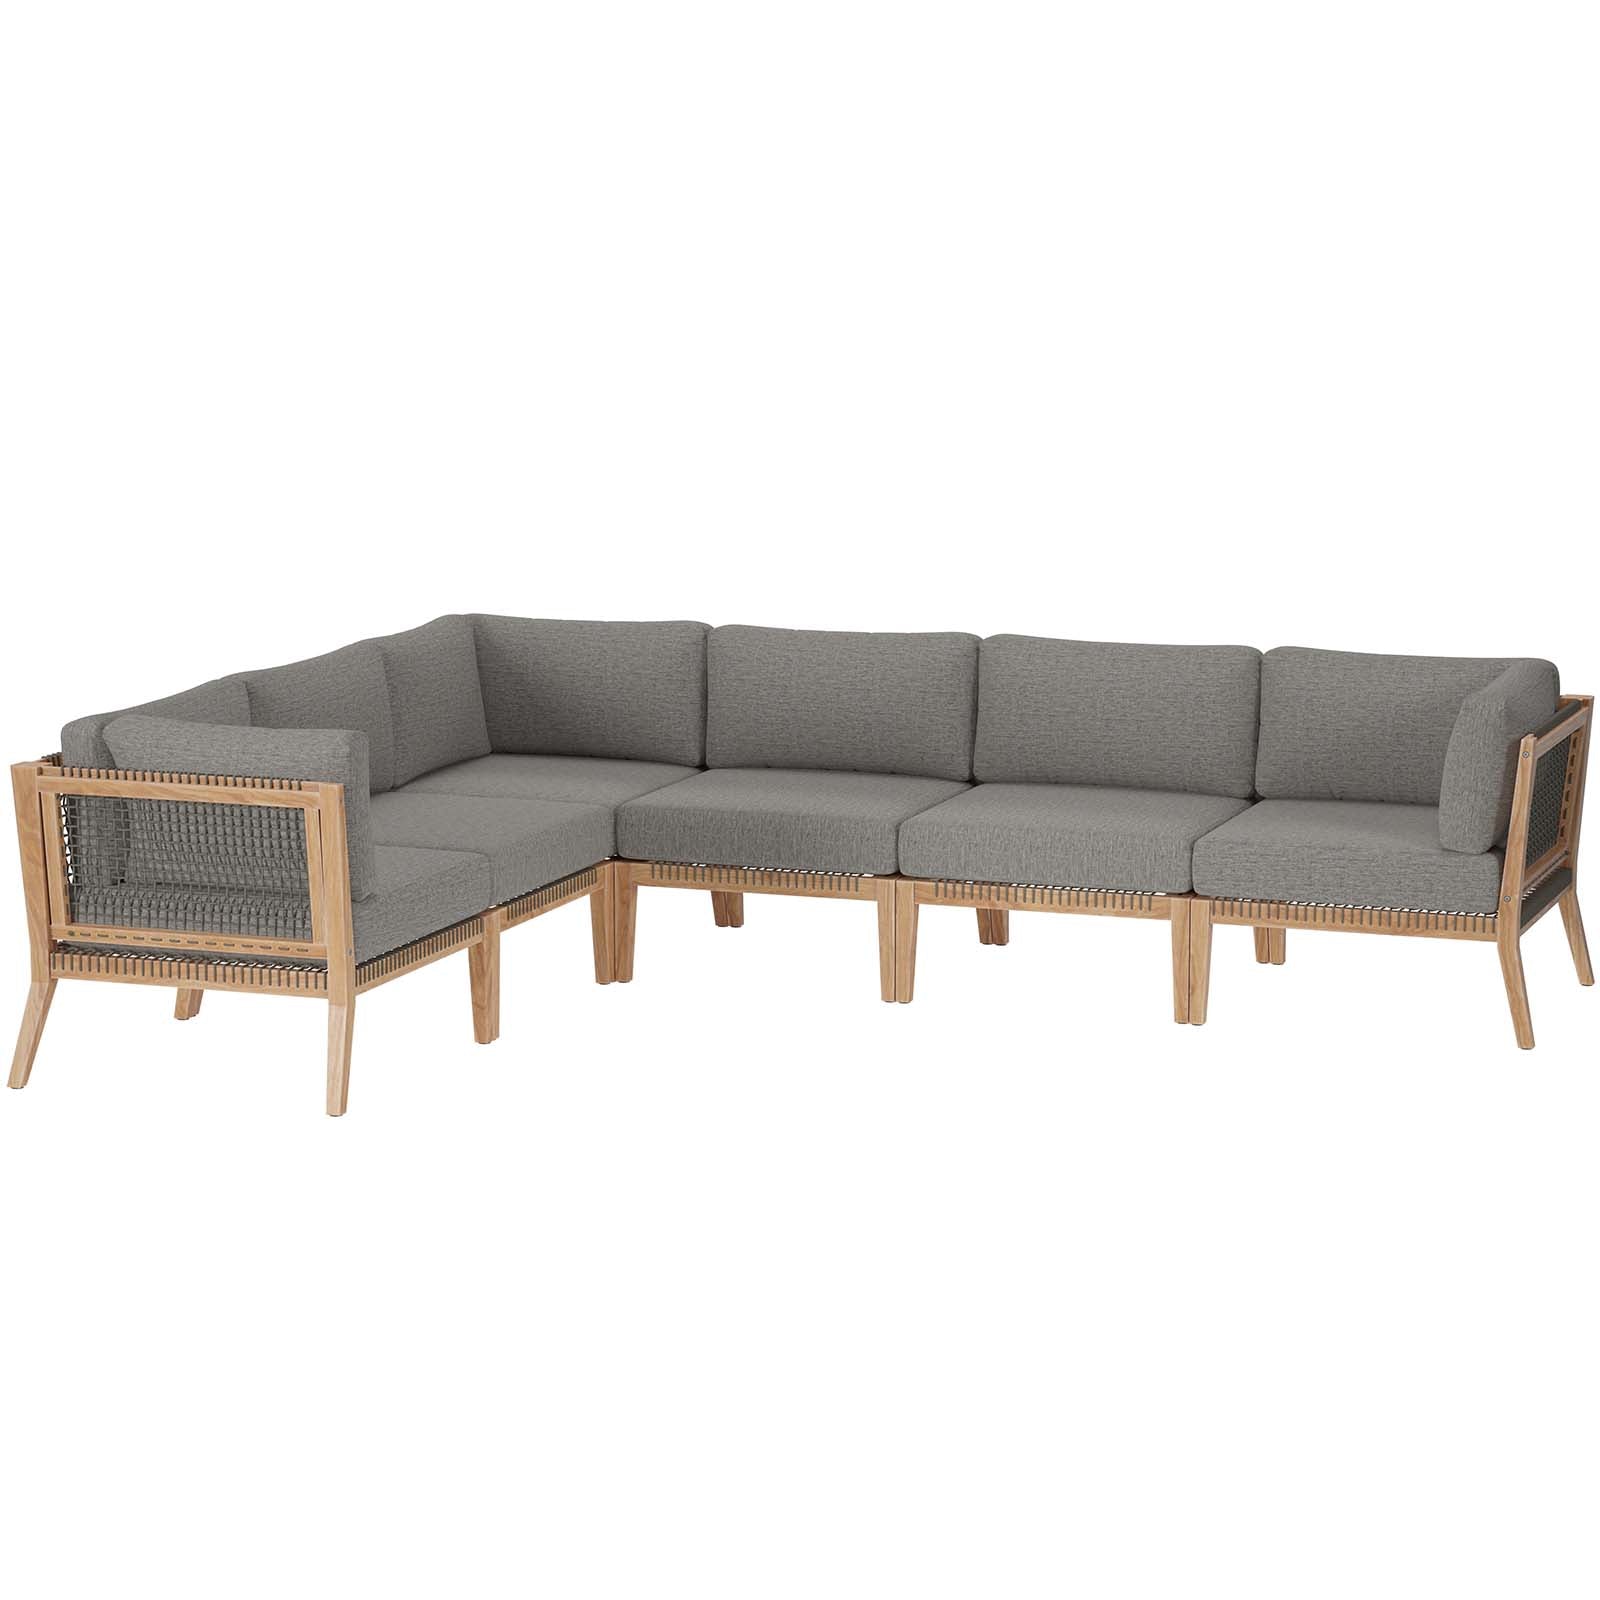 Modway Outdoor Sofas - Clearwater-Outdoor-Patio-Teak-Wood-6-Piece-Sectional-Sofa-Gray-Graphite